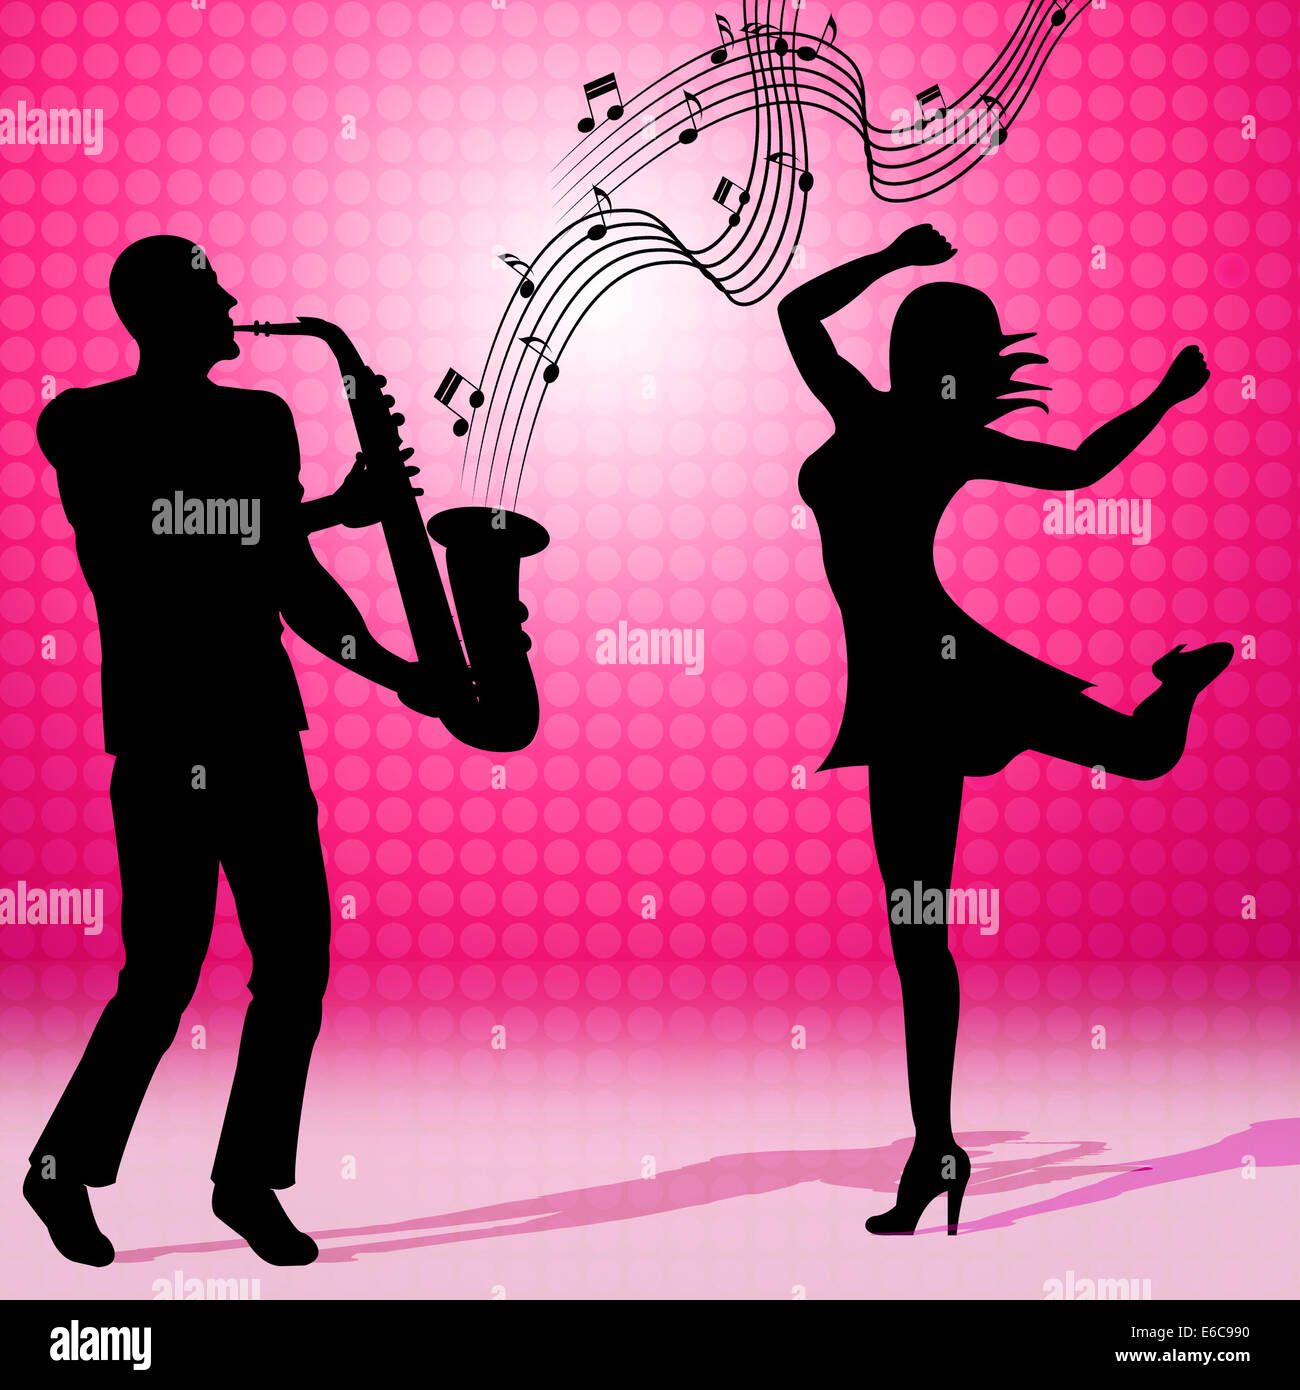 Saxophone Dancing Meaning Sound Track And Musical Stock Photo - Alamy